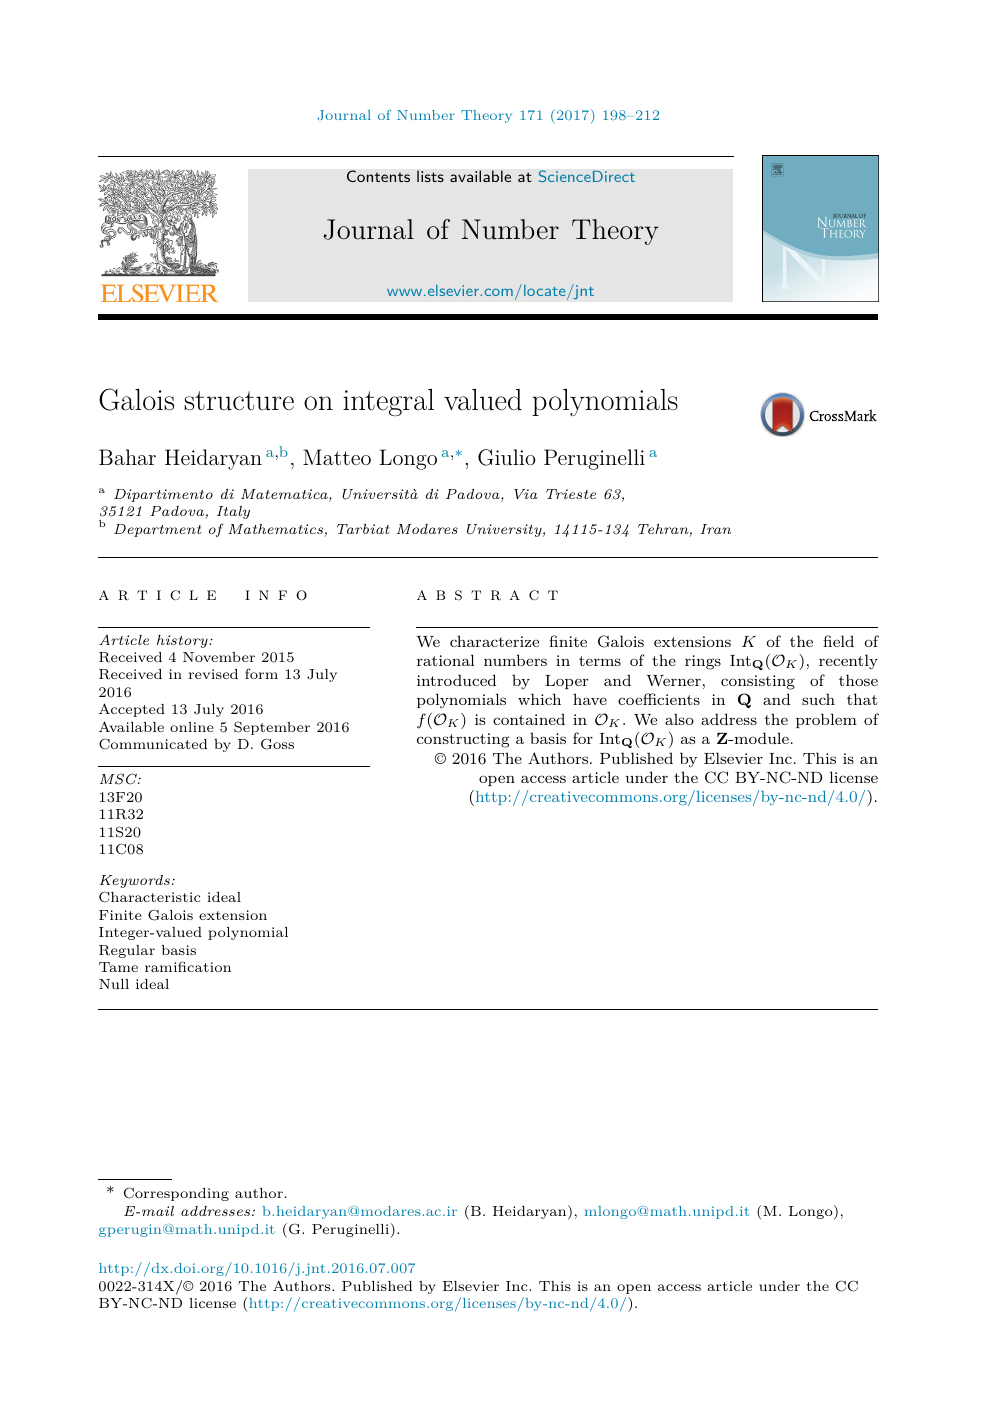 Galois Structure On Integral Valued Polynomials Topic Of Research Paper In Mathematics Download Scholarly Article Pdf And Read For Free On Cyberleninka Open Science Hub